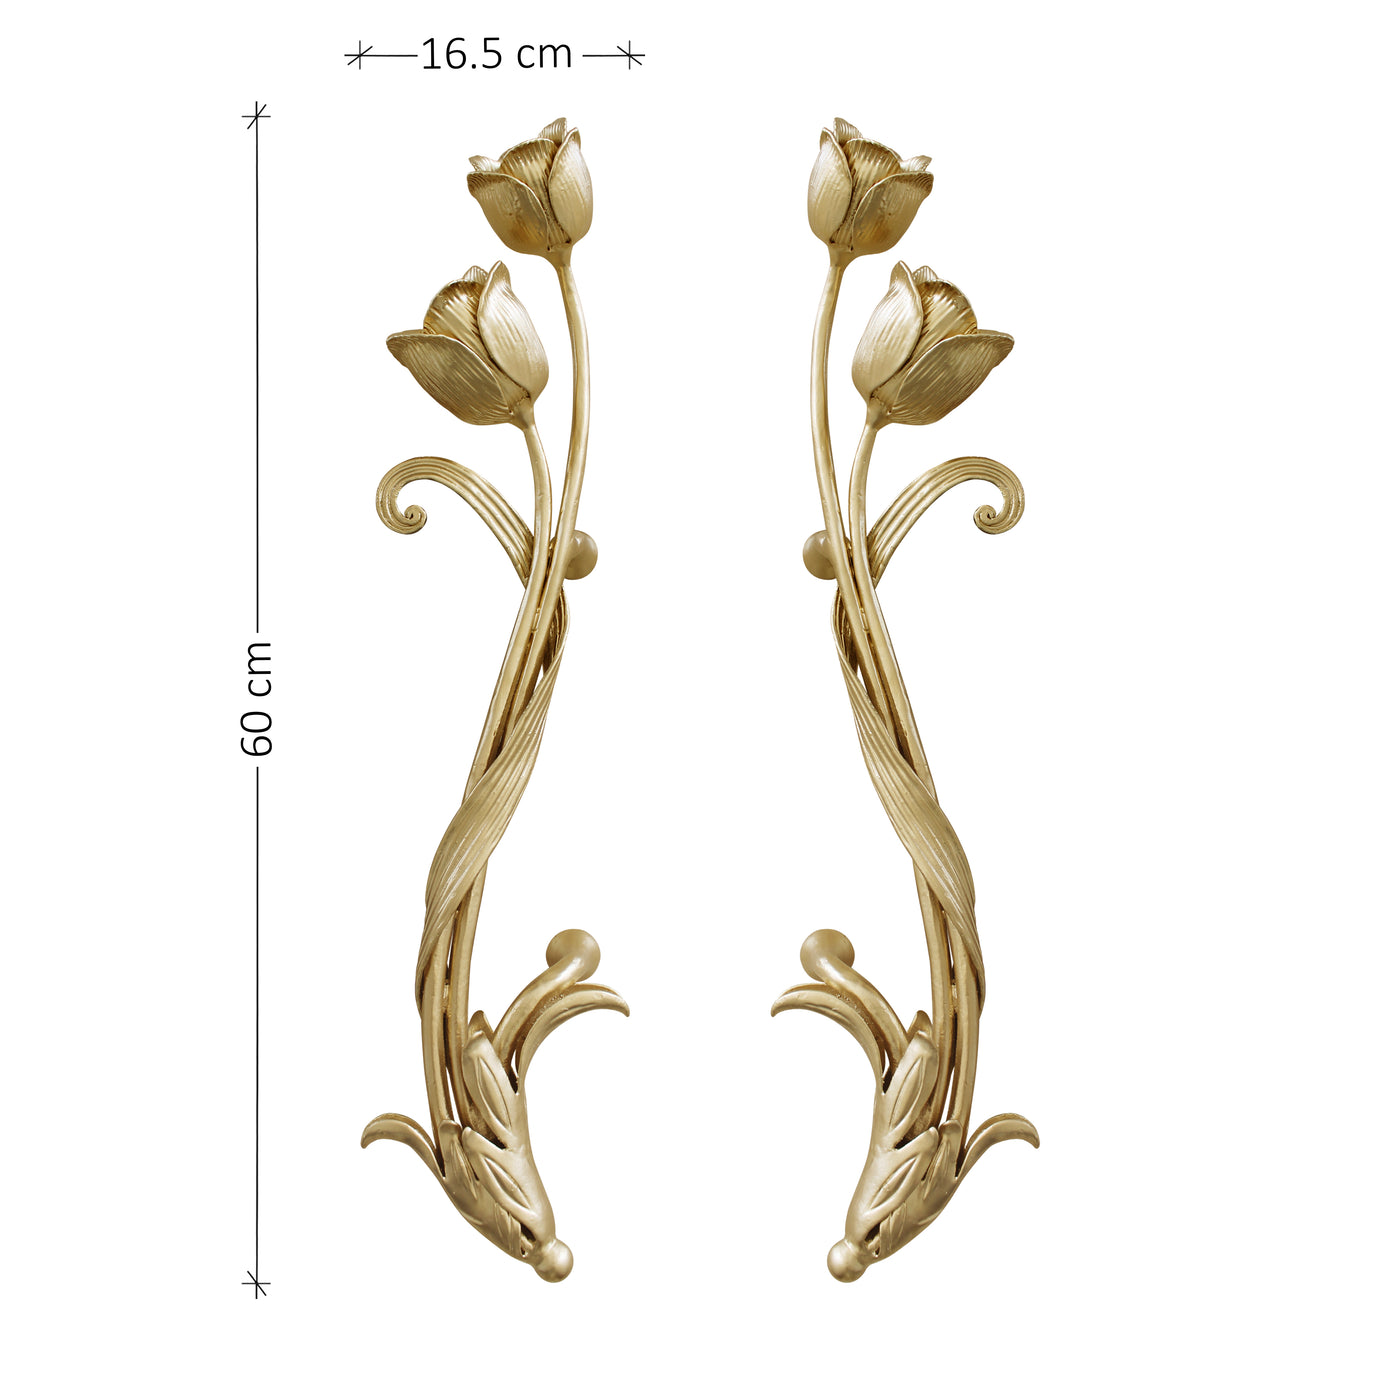 Pair of decorative pull handles inspired by tulips including dimensions